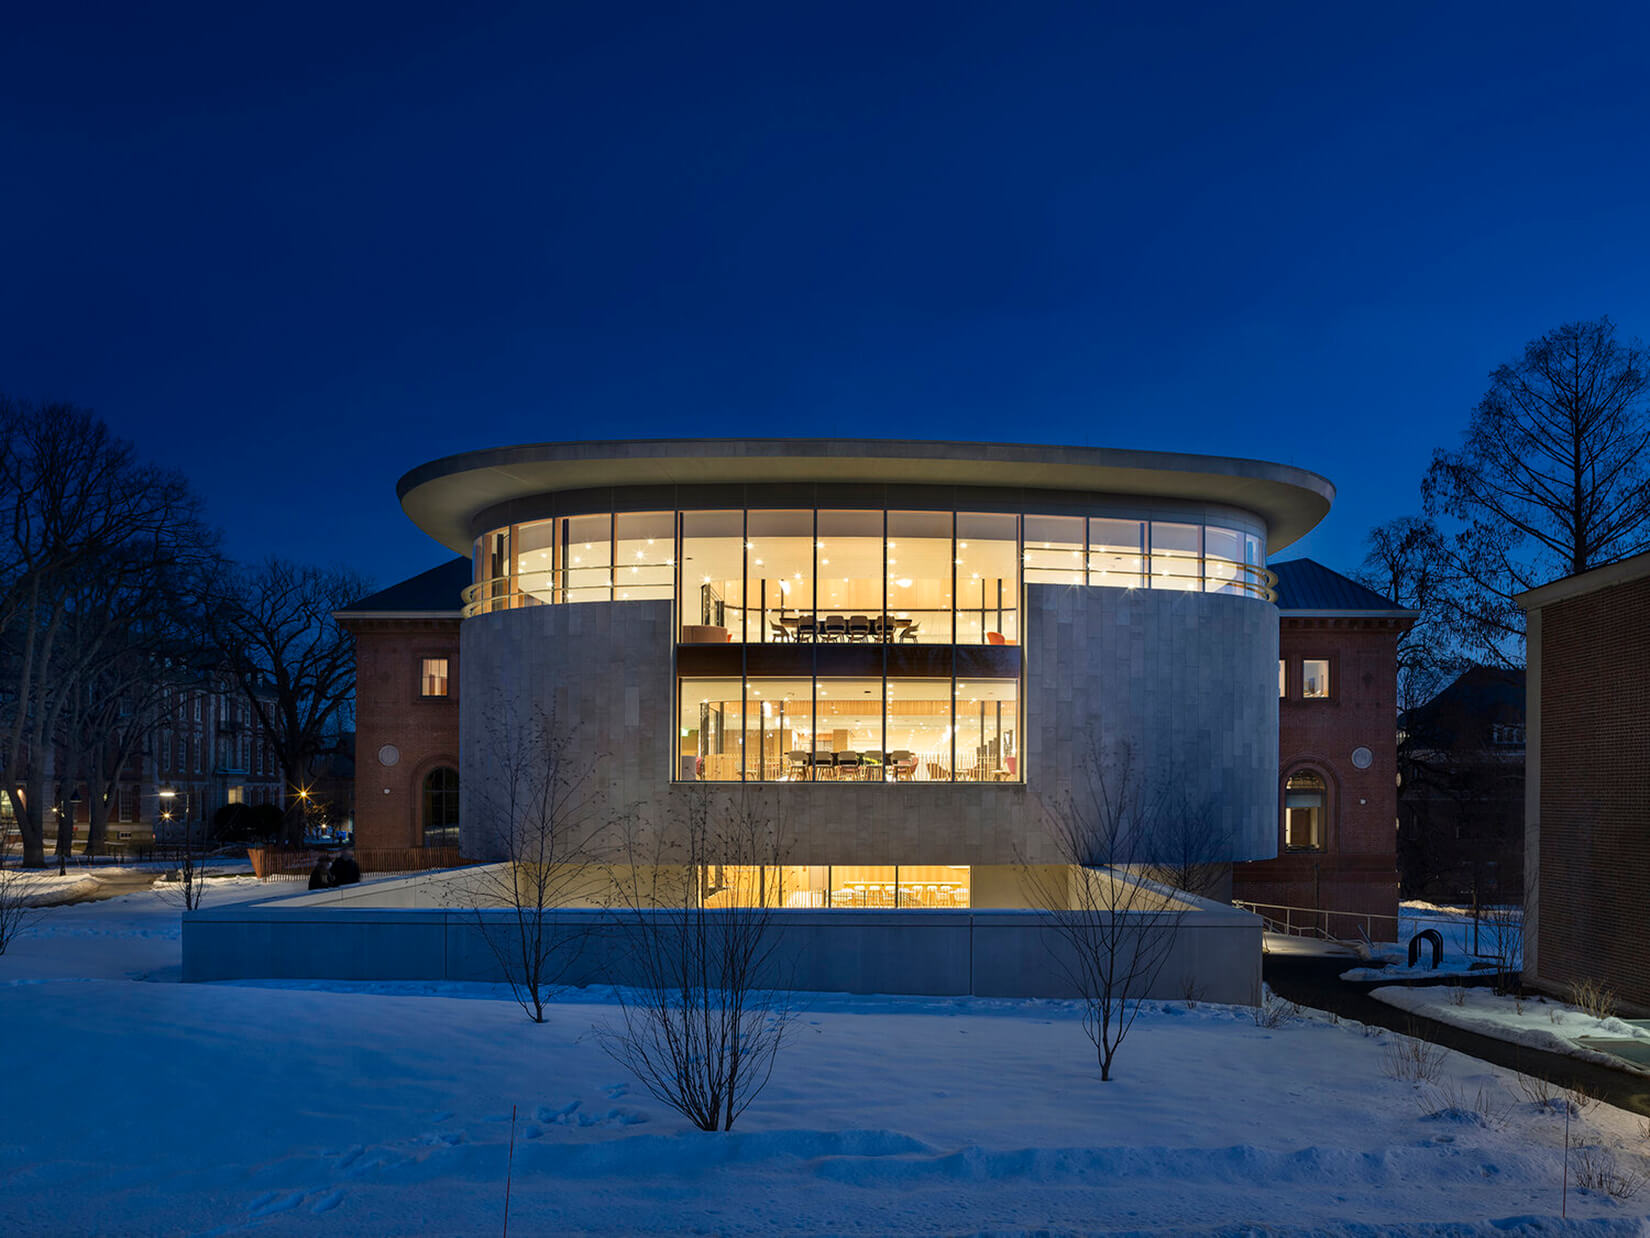 nightime view of circular library